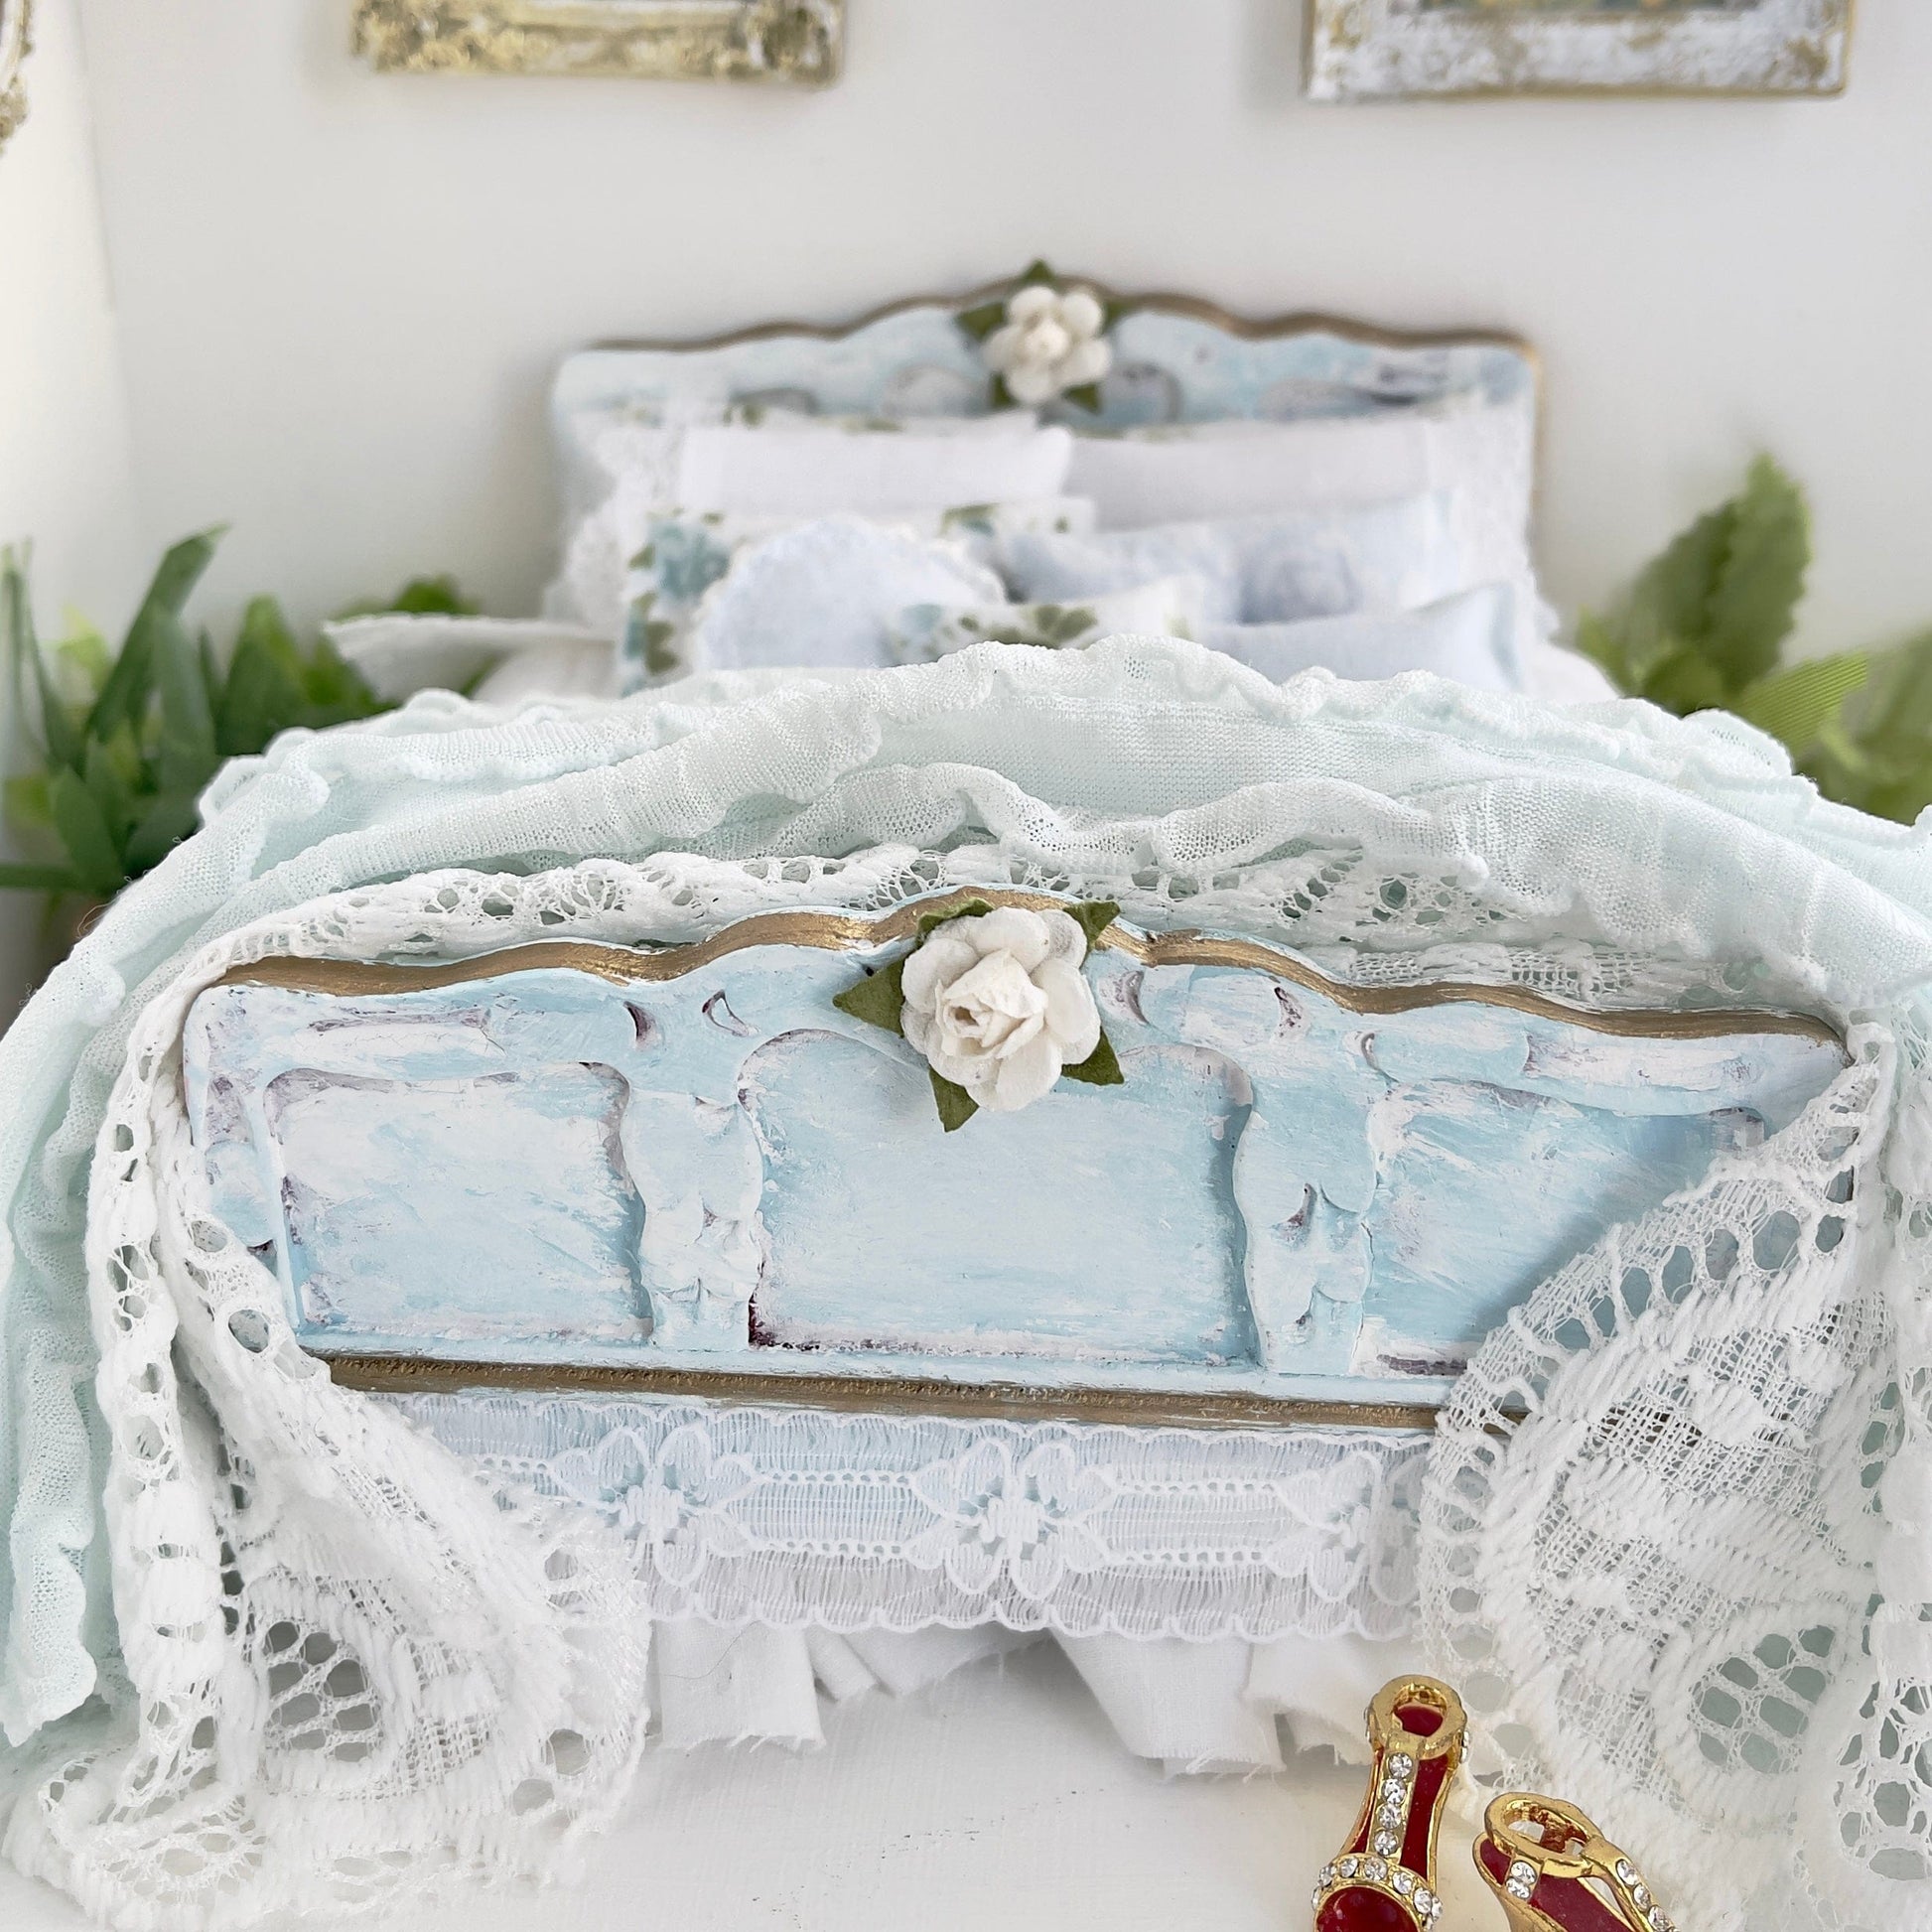 Chantallena Doll House Dressed Bed |  White Shabby Cotton with Pale Blue Ruffled Throw, Lace Throw and Assorted Pillows | Jeremy